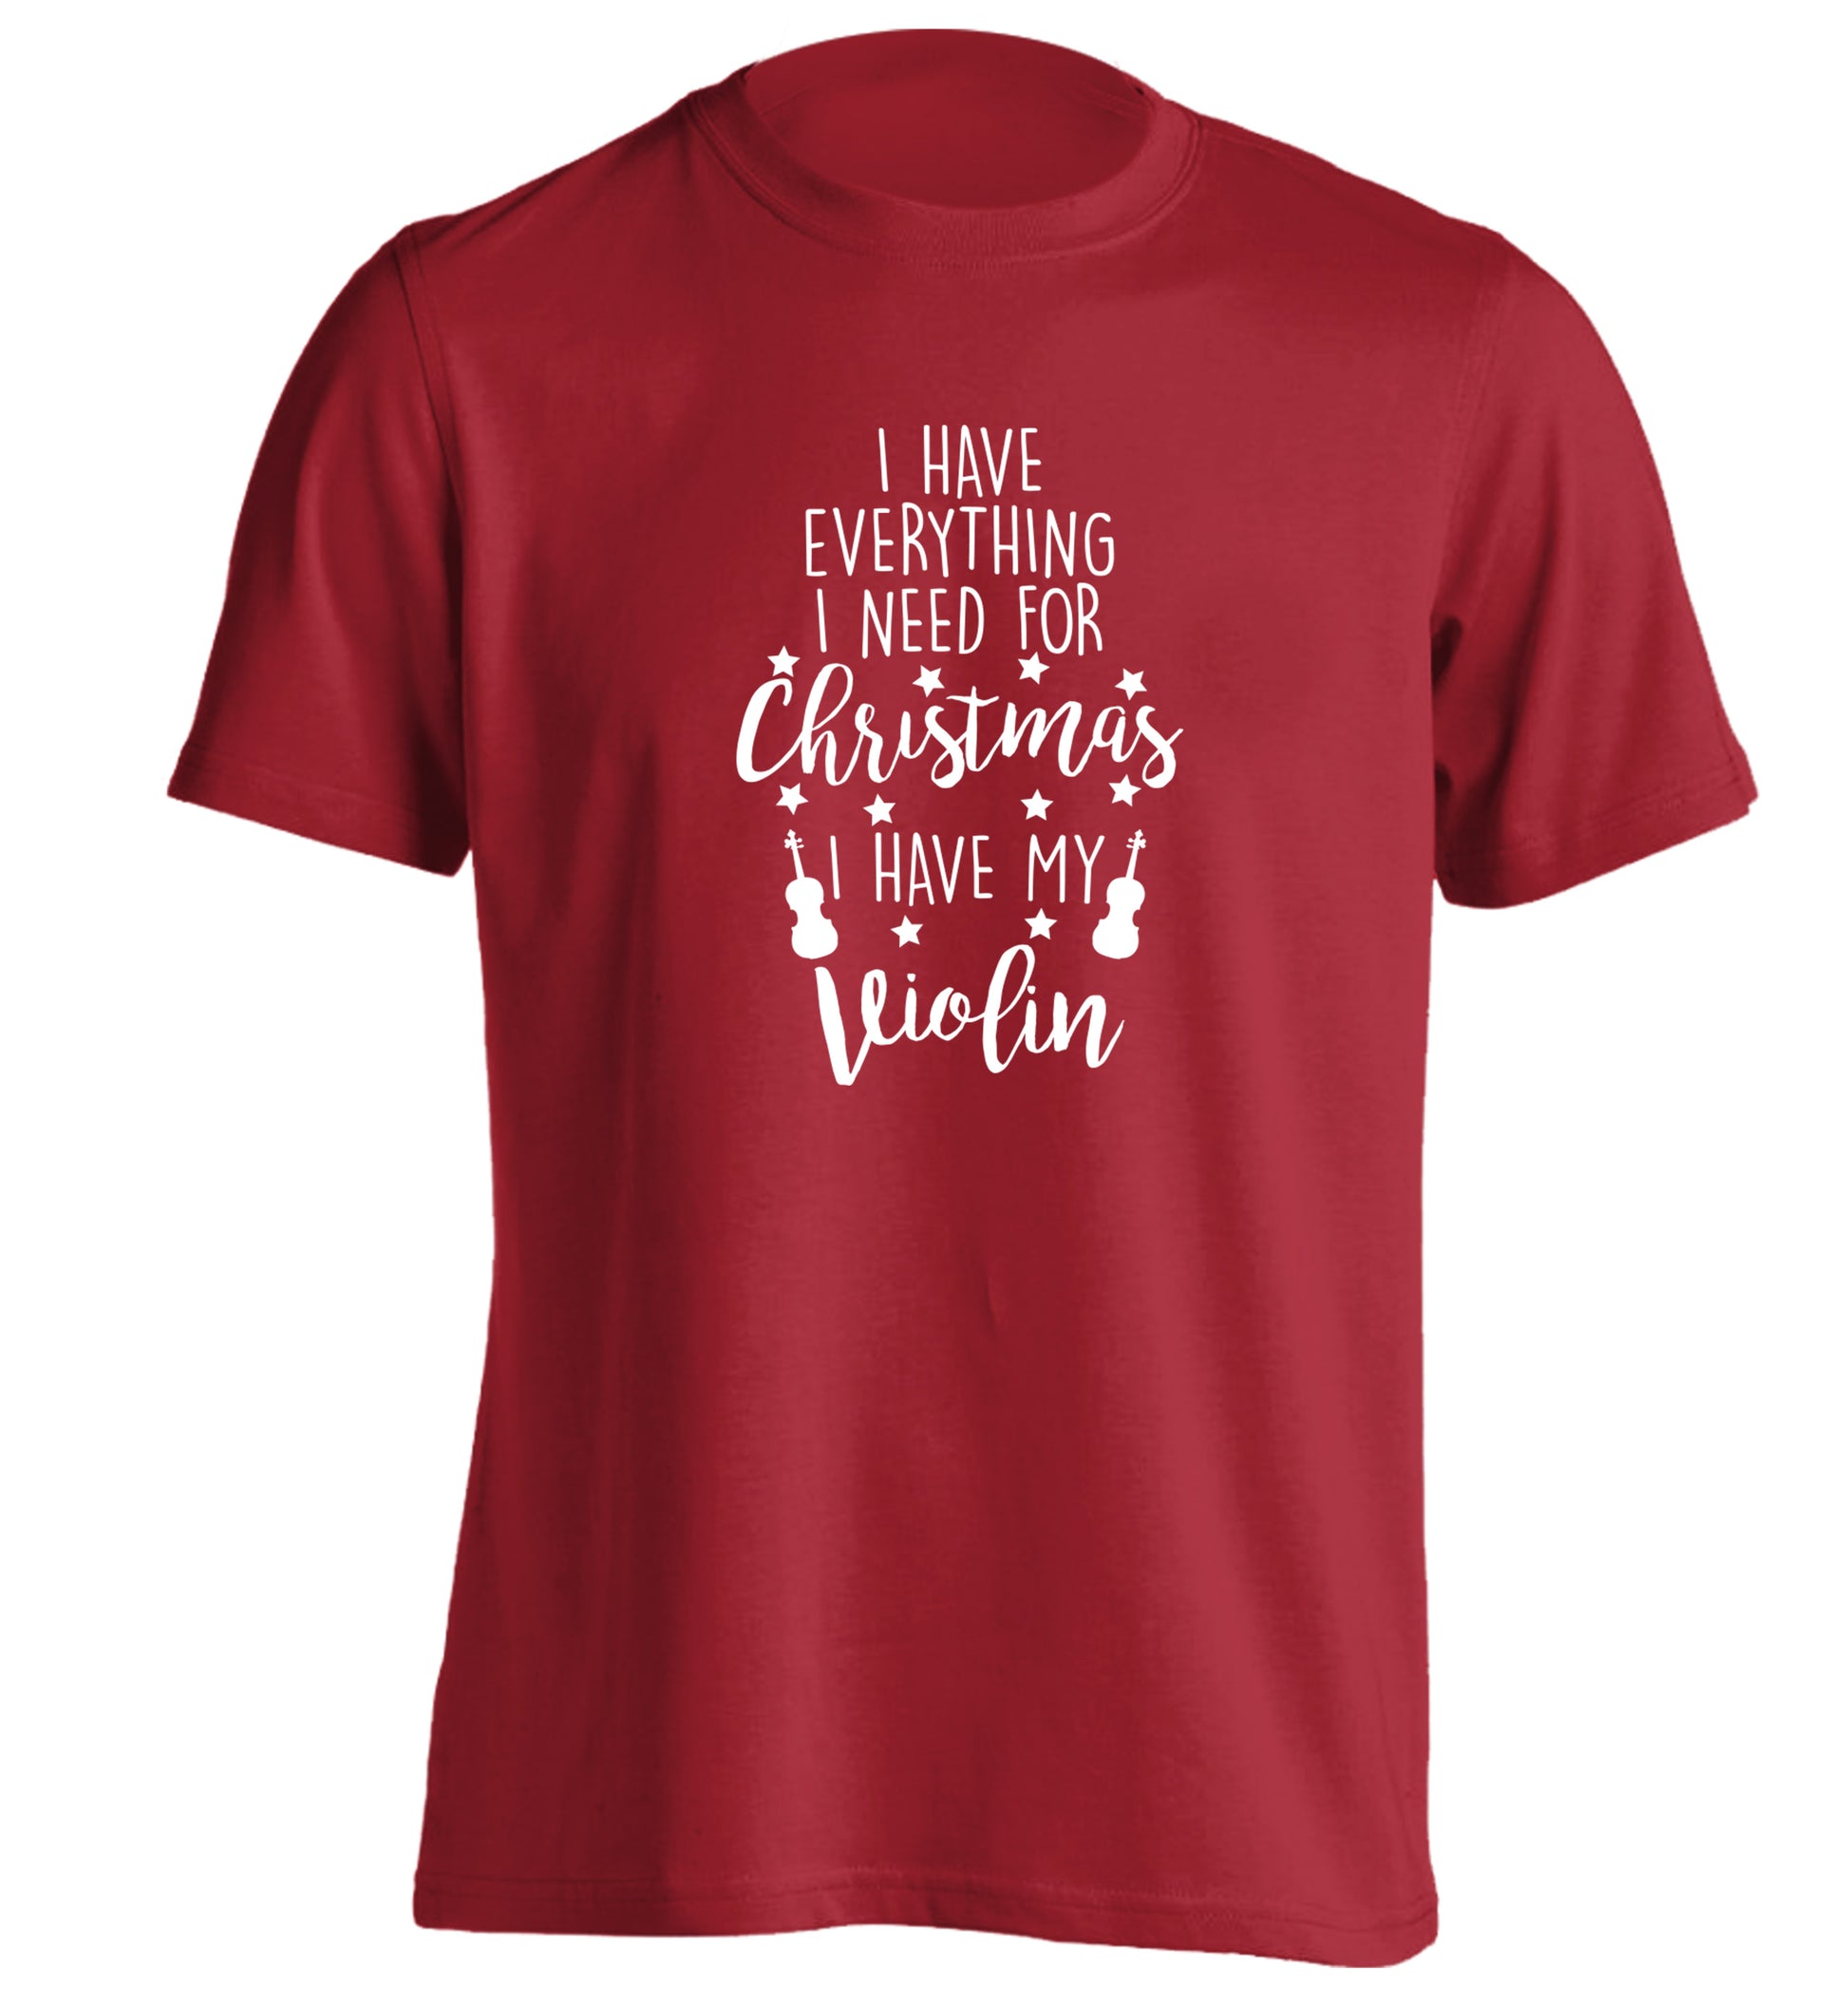 I have everything I need for Christmas I have my violin adults unisex red Tshirt 2XL